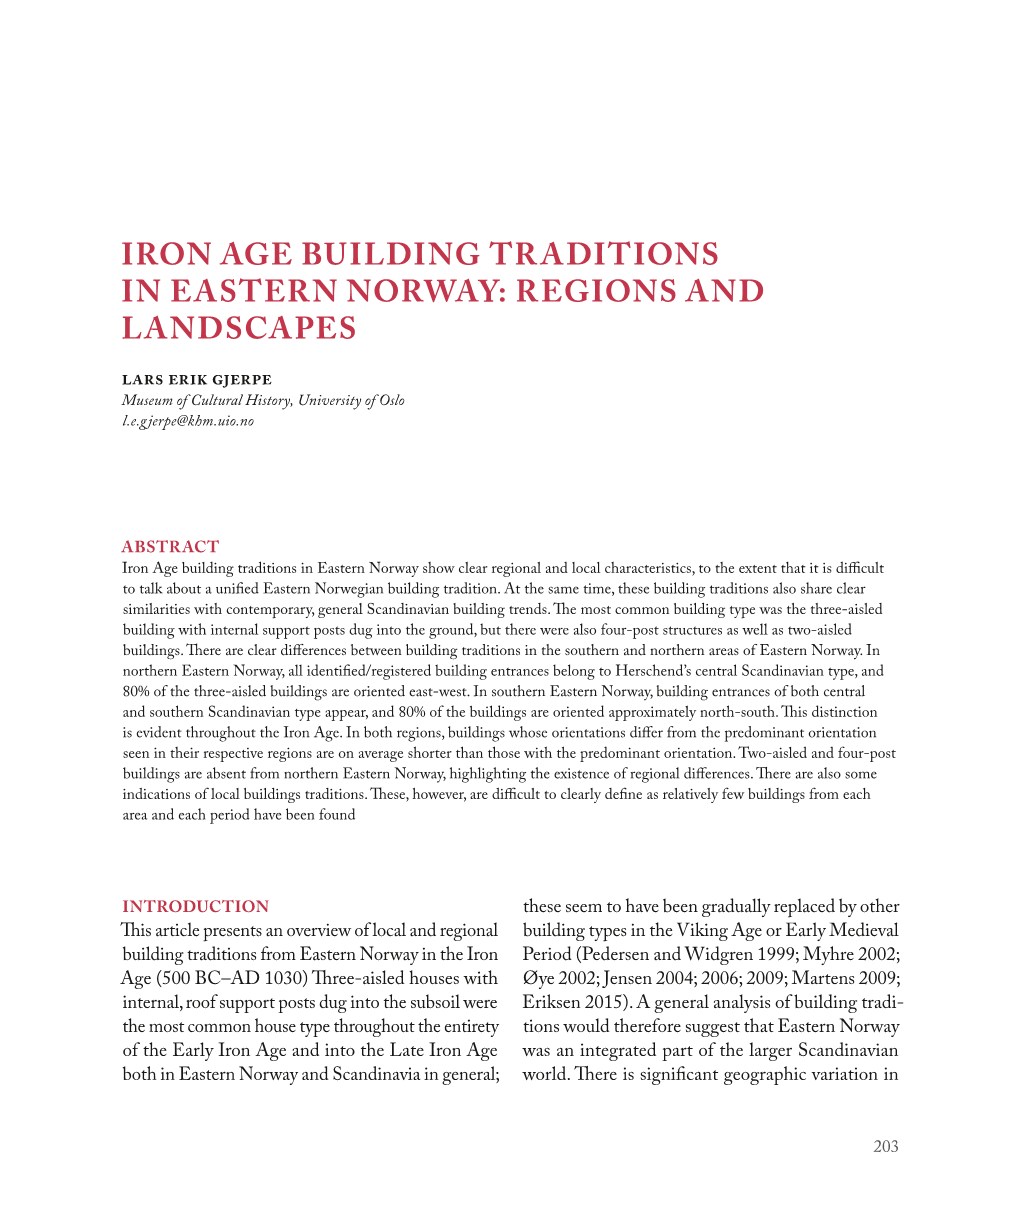 Iron Age Building Traditions in Eastern Norway: Regions and Landscapes